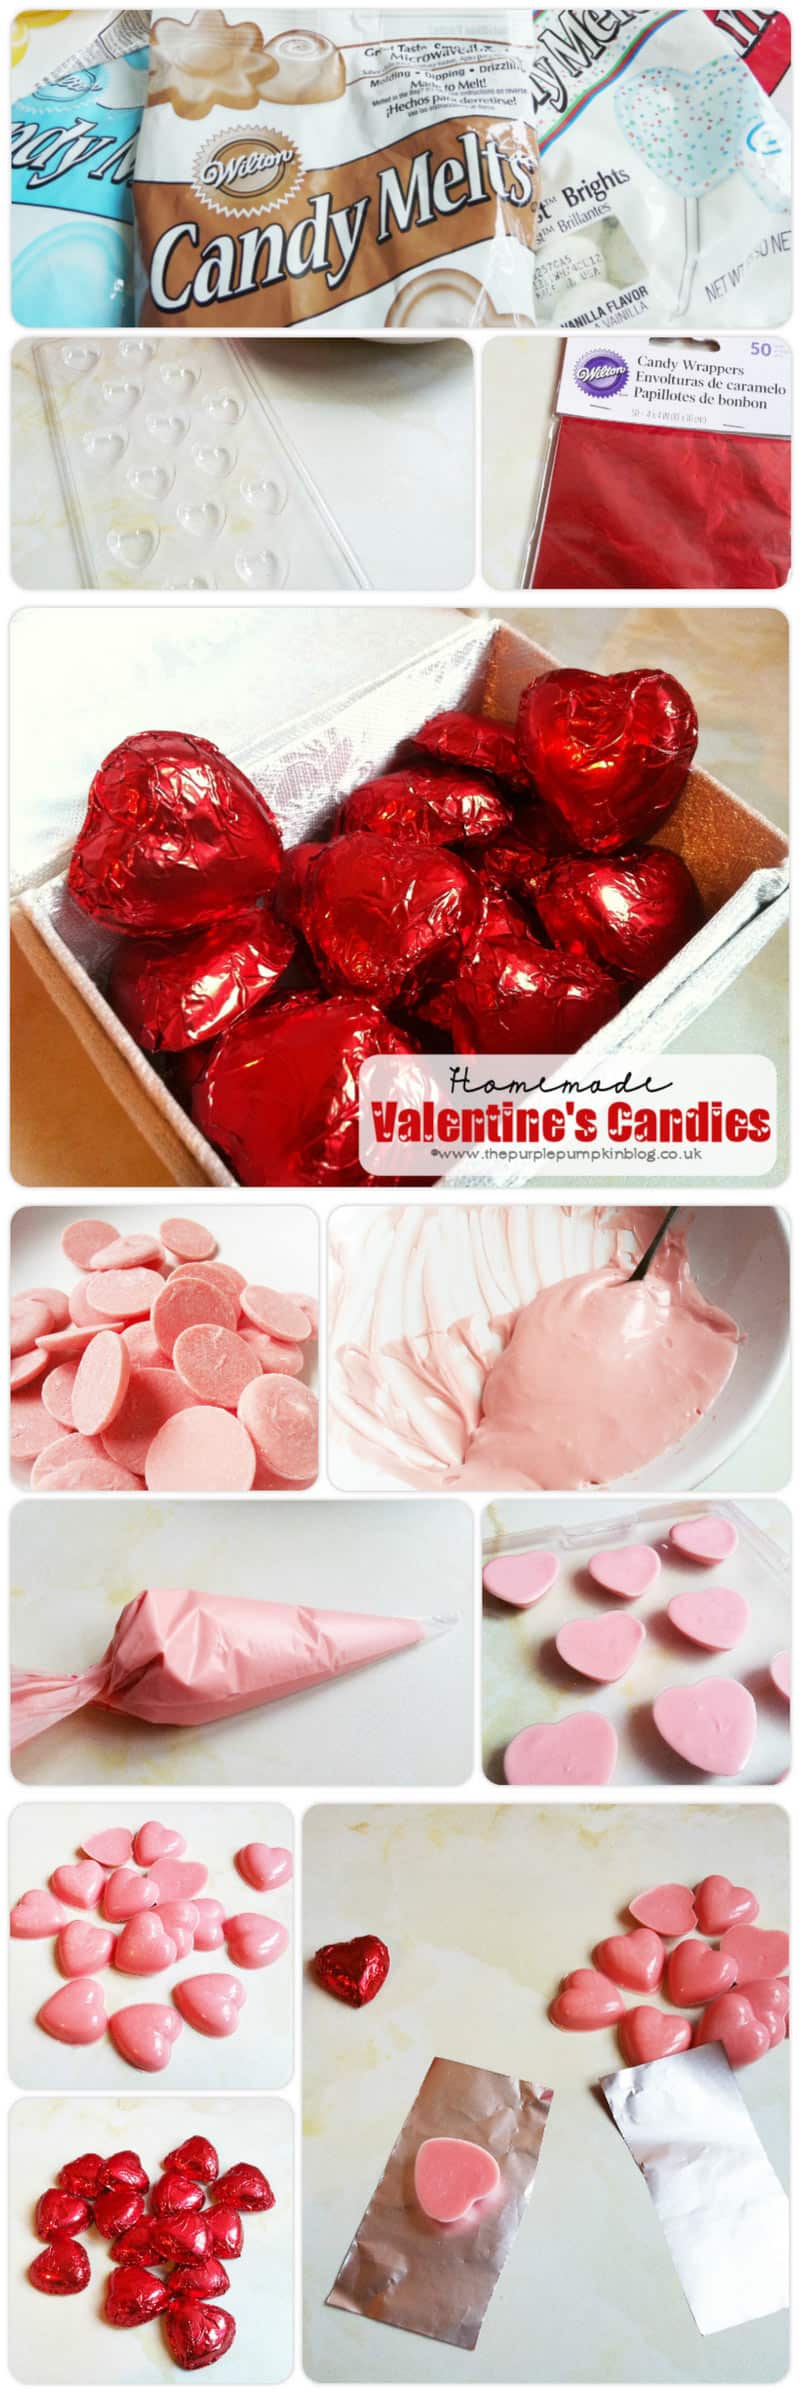 Homemade Valentines Candies - these candies are really quick and easy to make, and a sweet last minute gift for your Valentine!